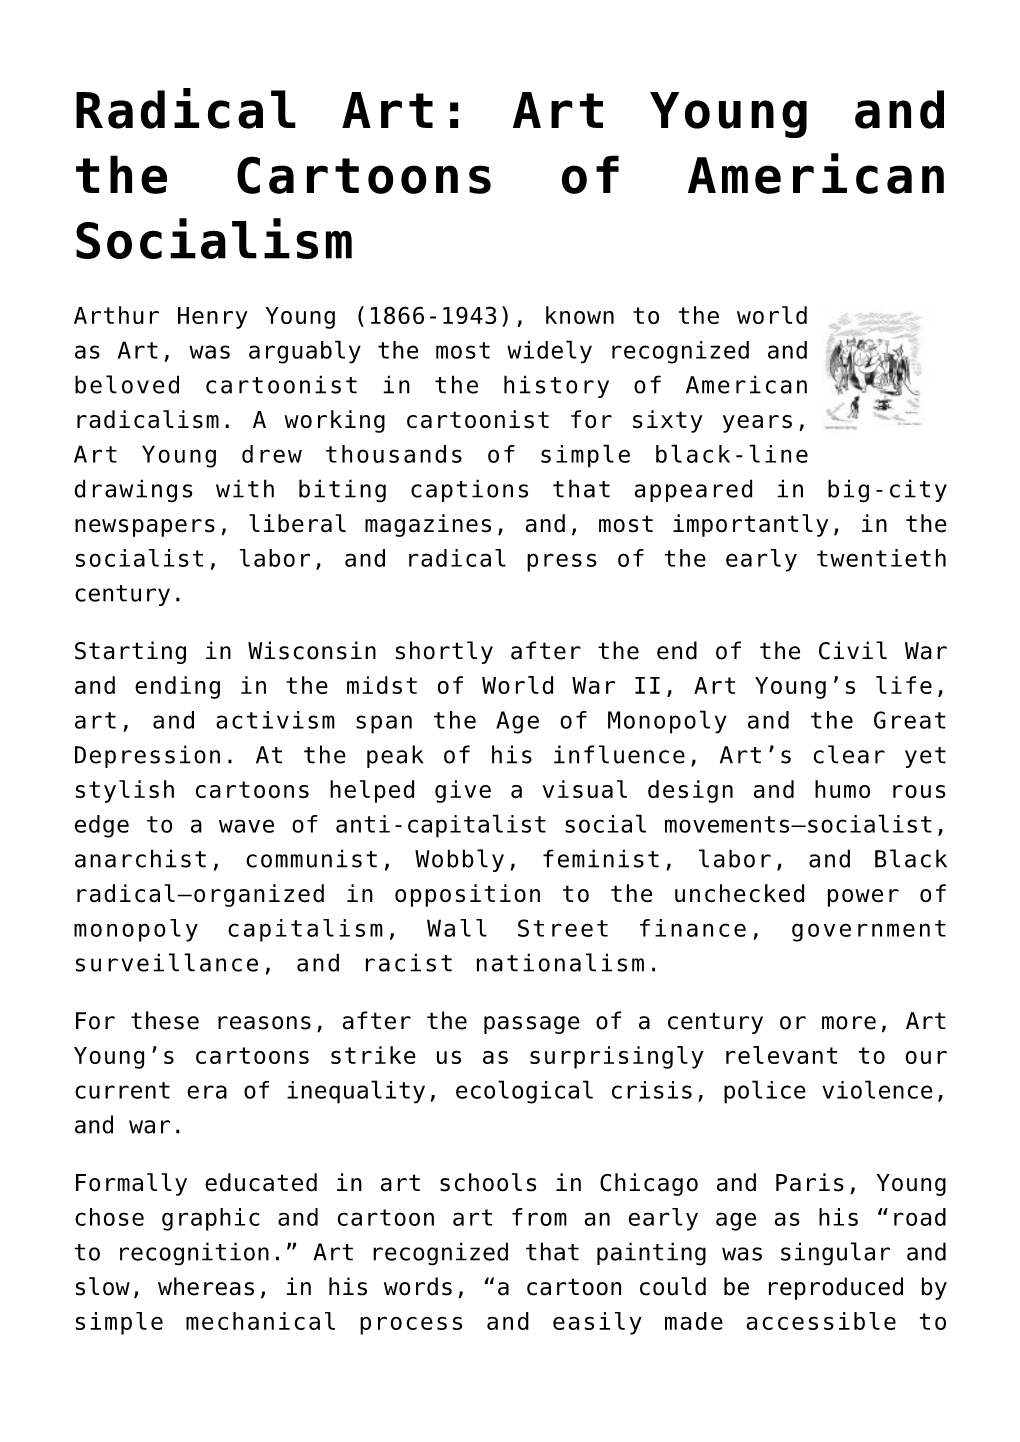 Art Young and the Cartoons of American Socialism